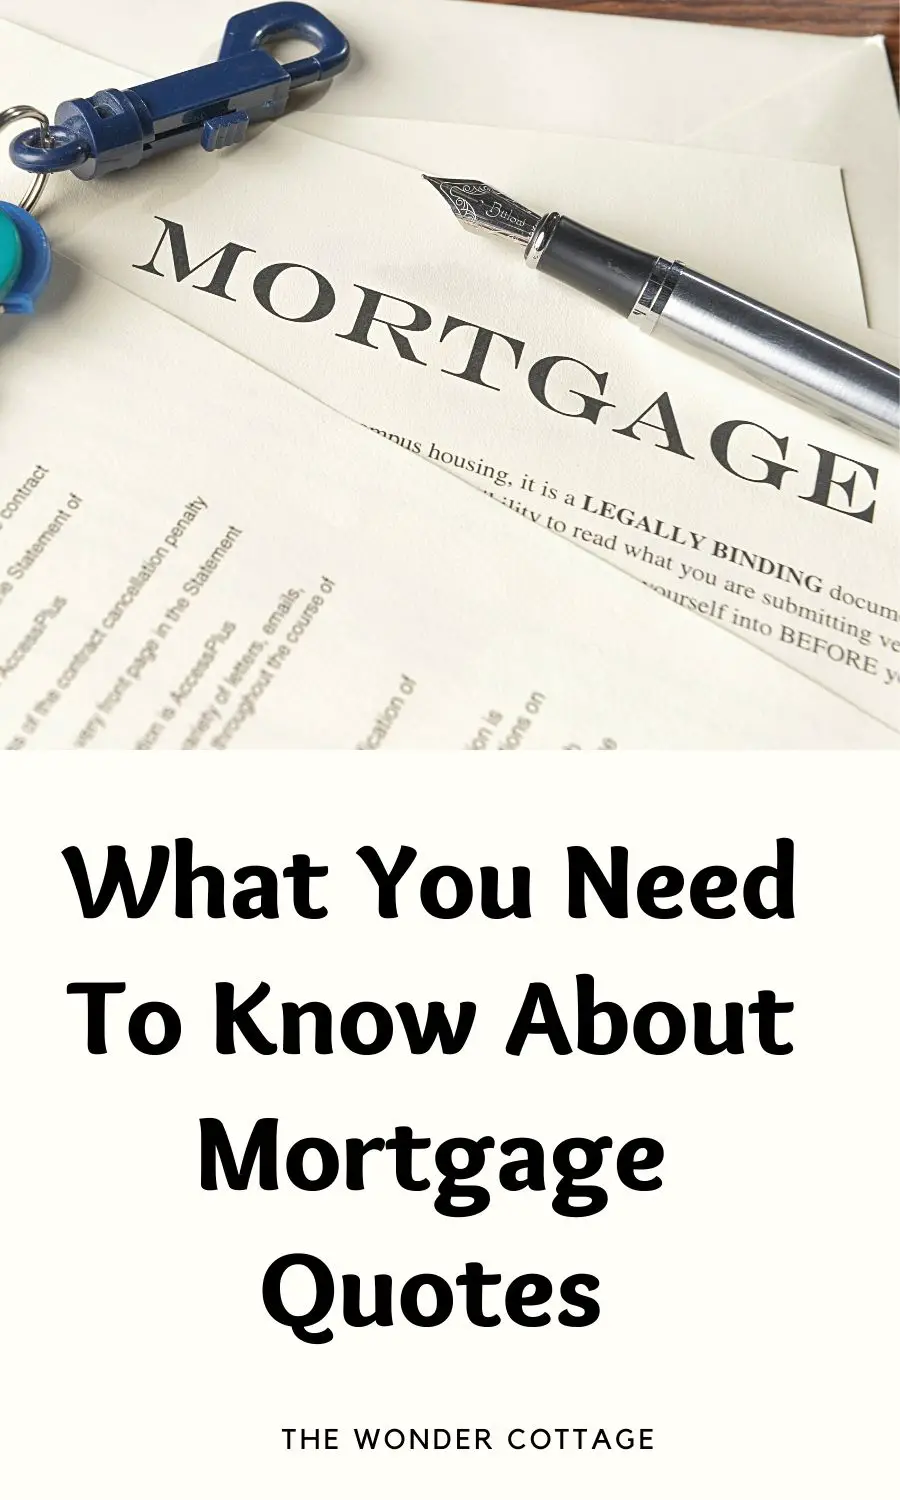 What You Need To Know About Mortgage Quotes